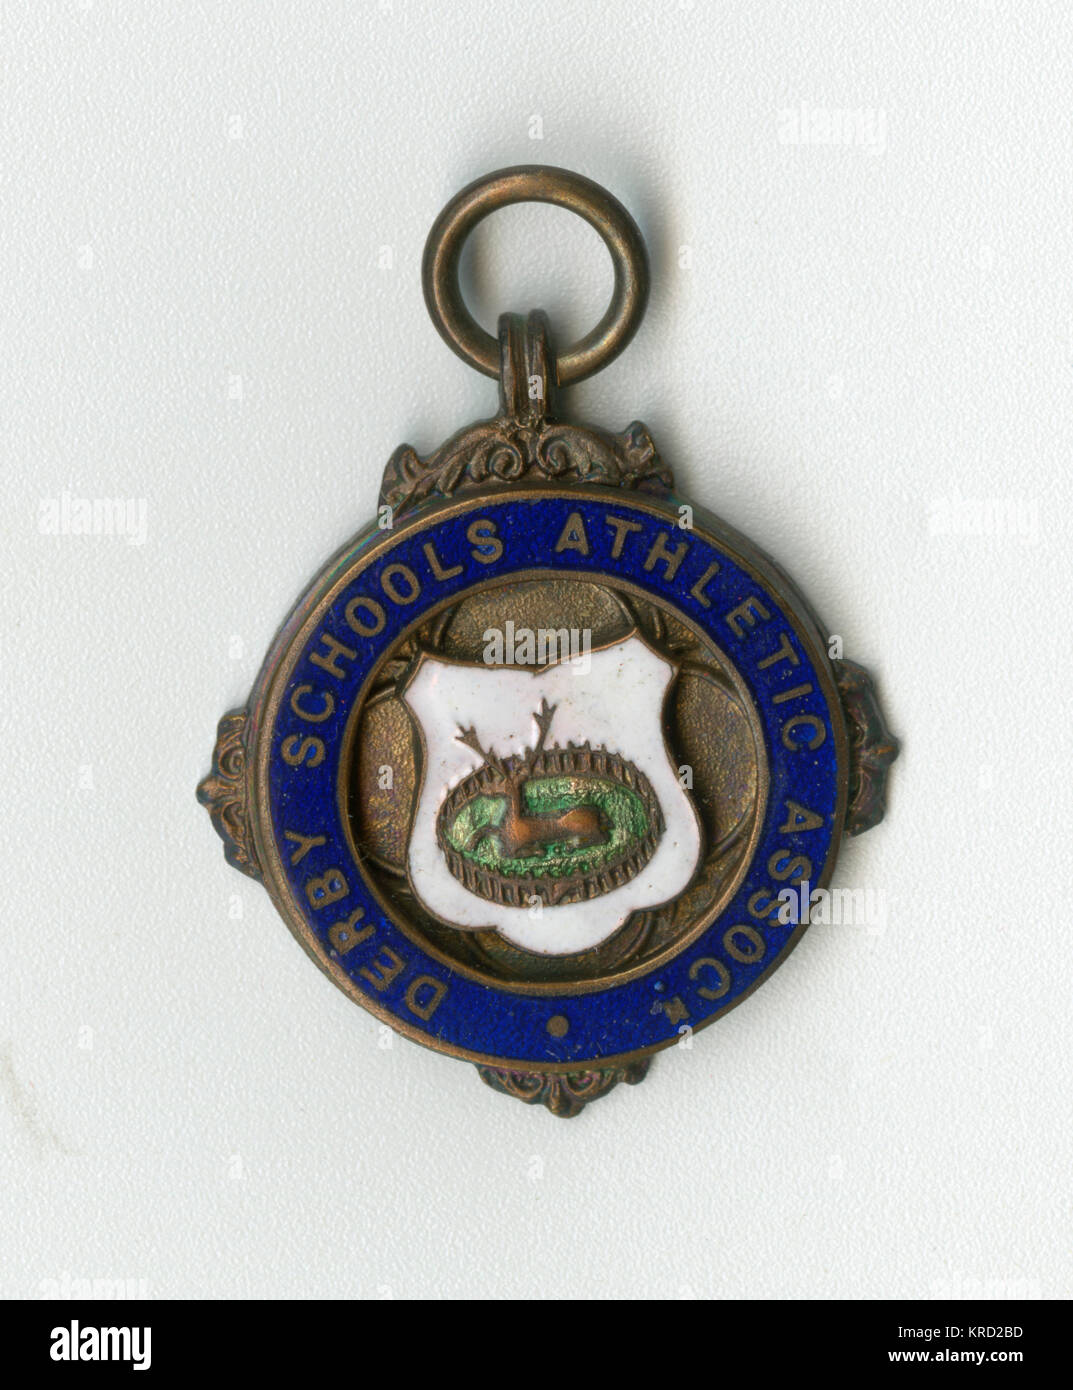 Medal of the Derby Schools Athletic Association, featuring the Derby emblem of a deer in a park at the centre.      Date: circa 1920s Stock Photo